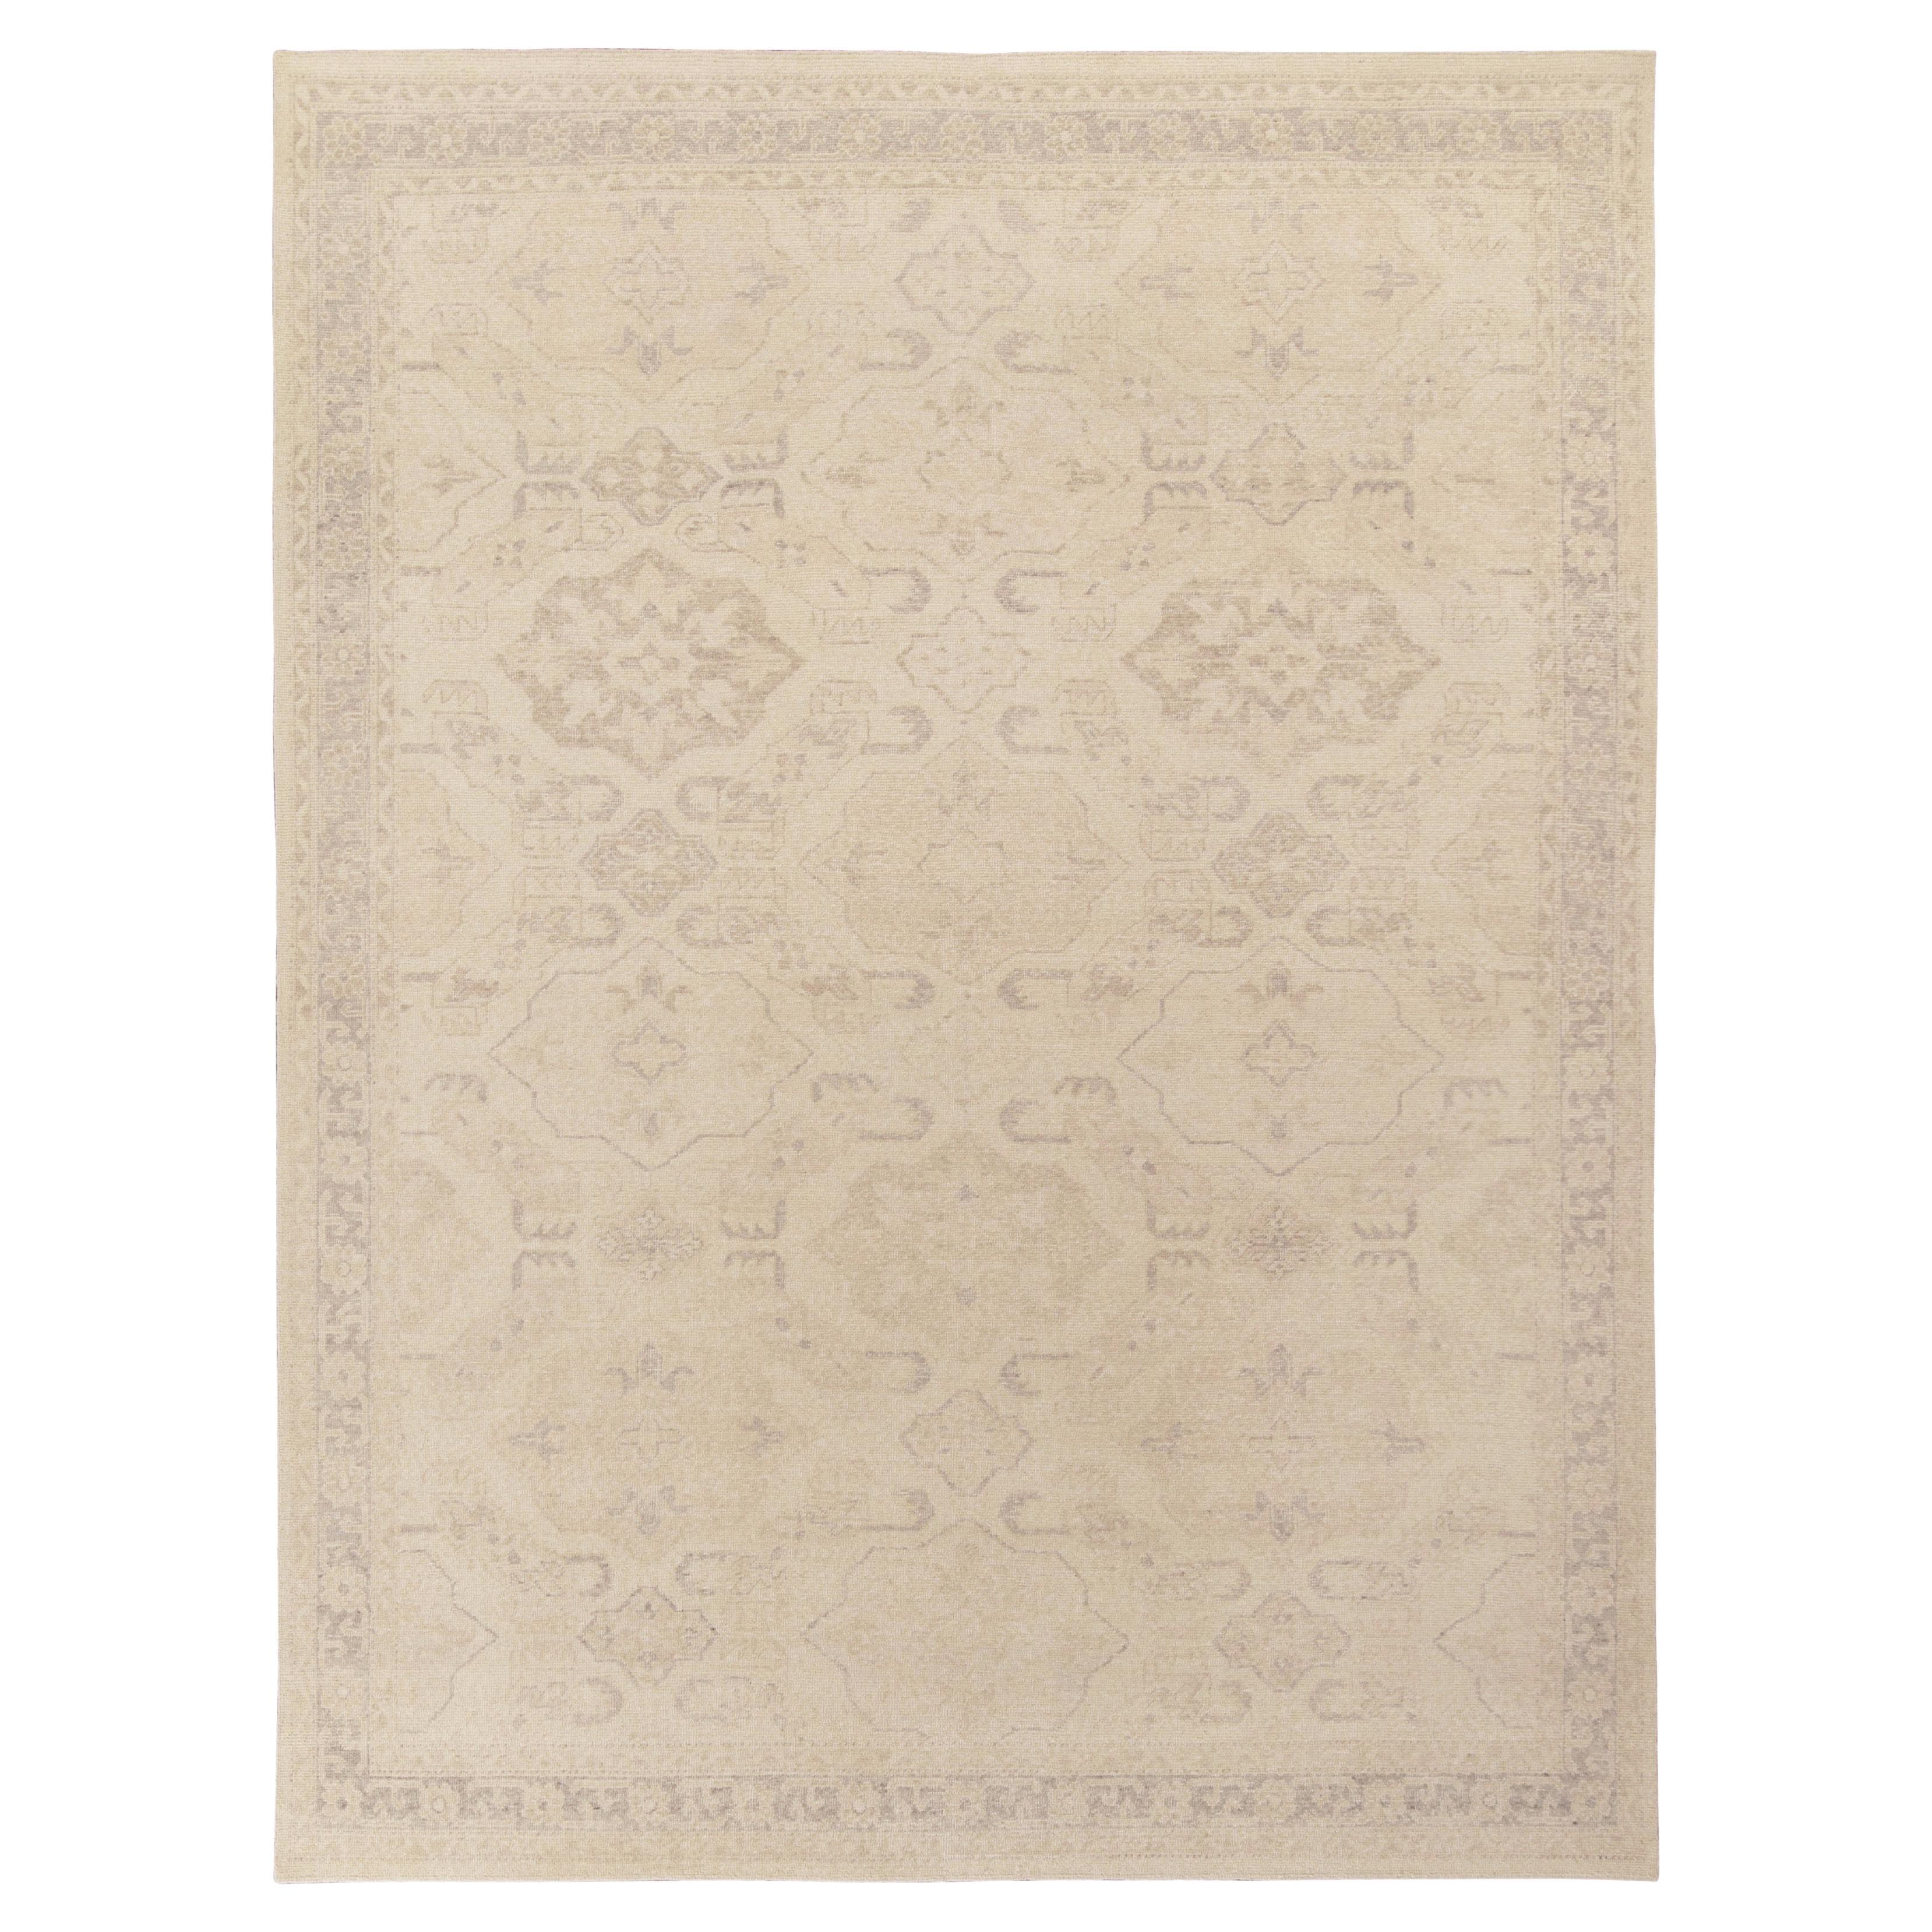 Rug & Kilim’s Distressed Classic Style Rug in all over Beige Gray Geometric Patt